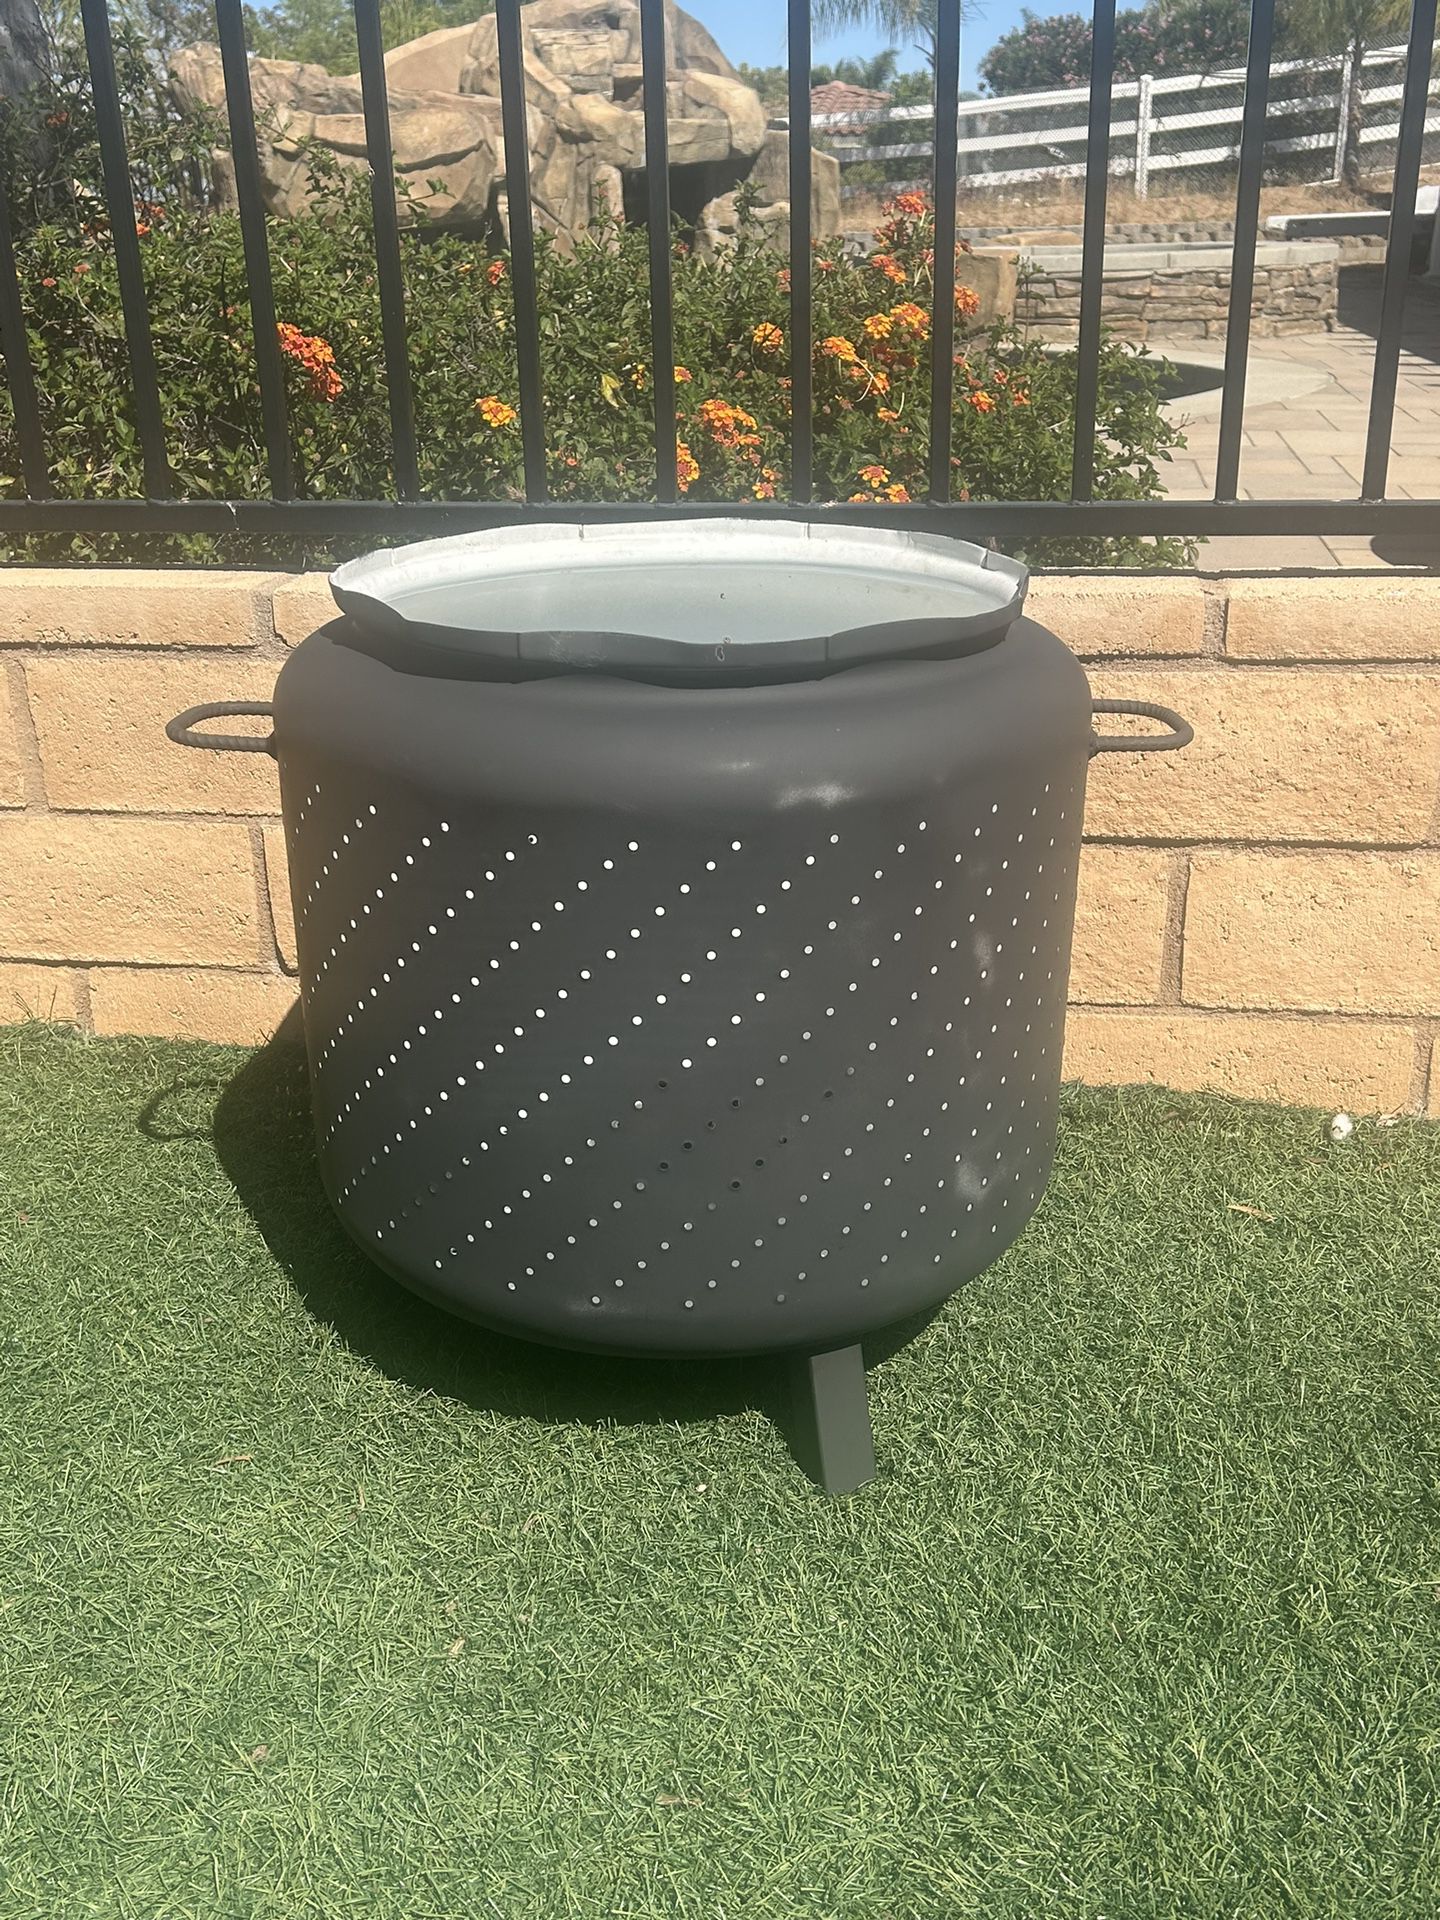 Fire Pit Made From Washing Machine Tub With Legs And Handles Painted With High Temp BBQ Heat Paint